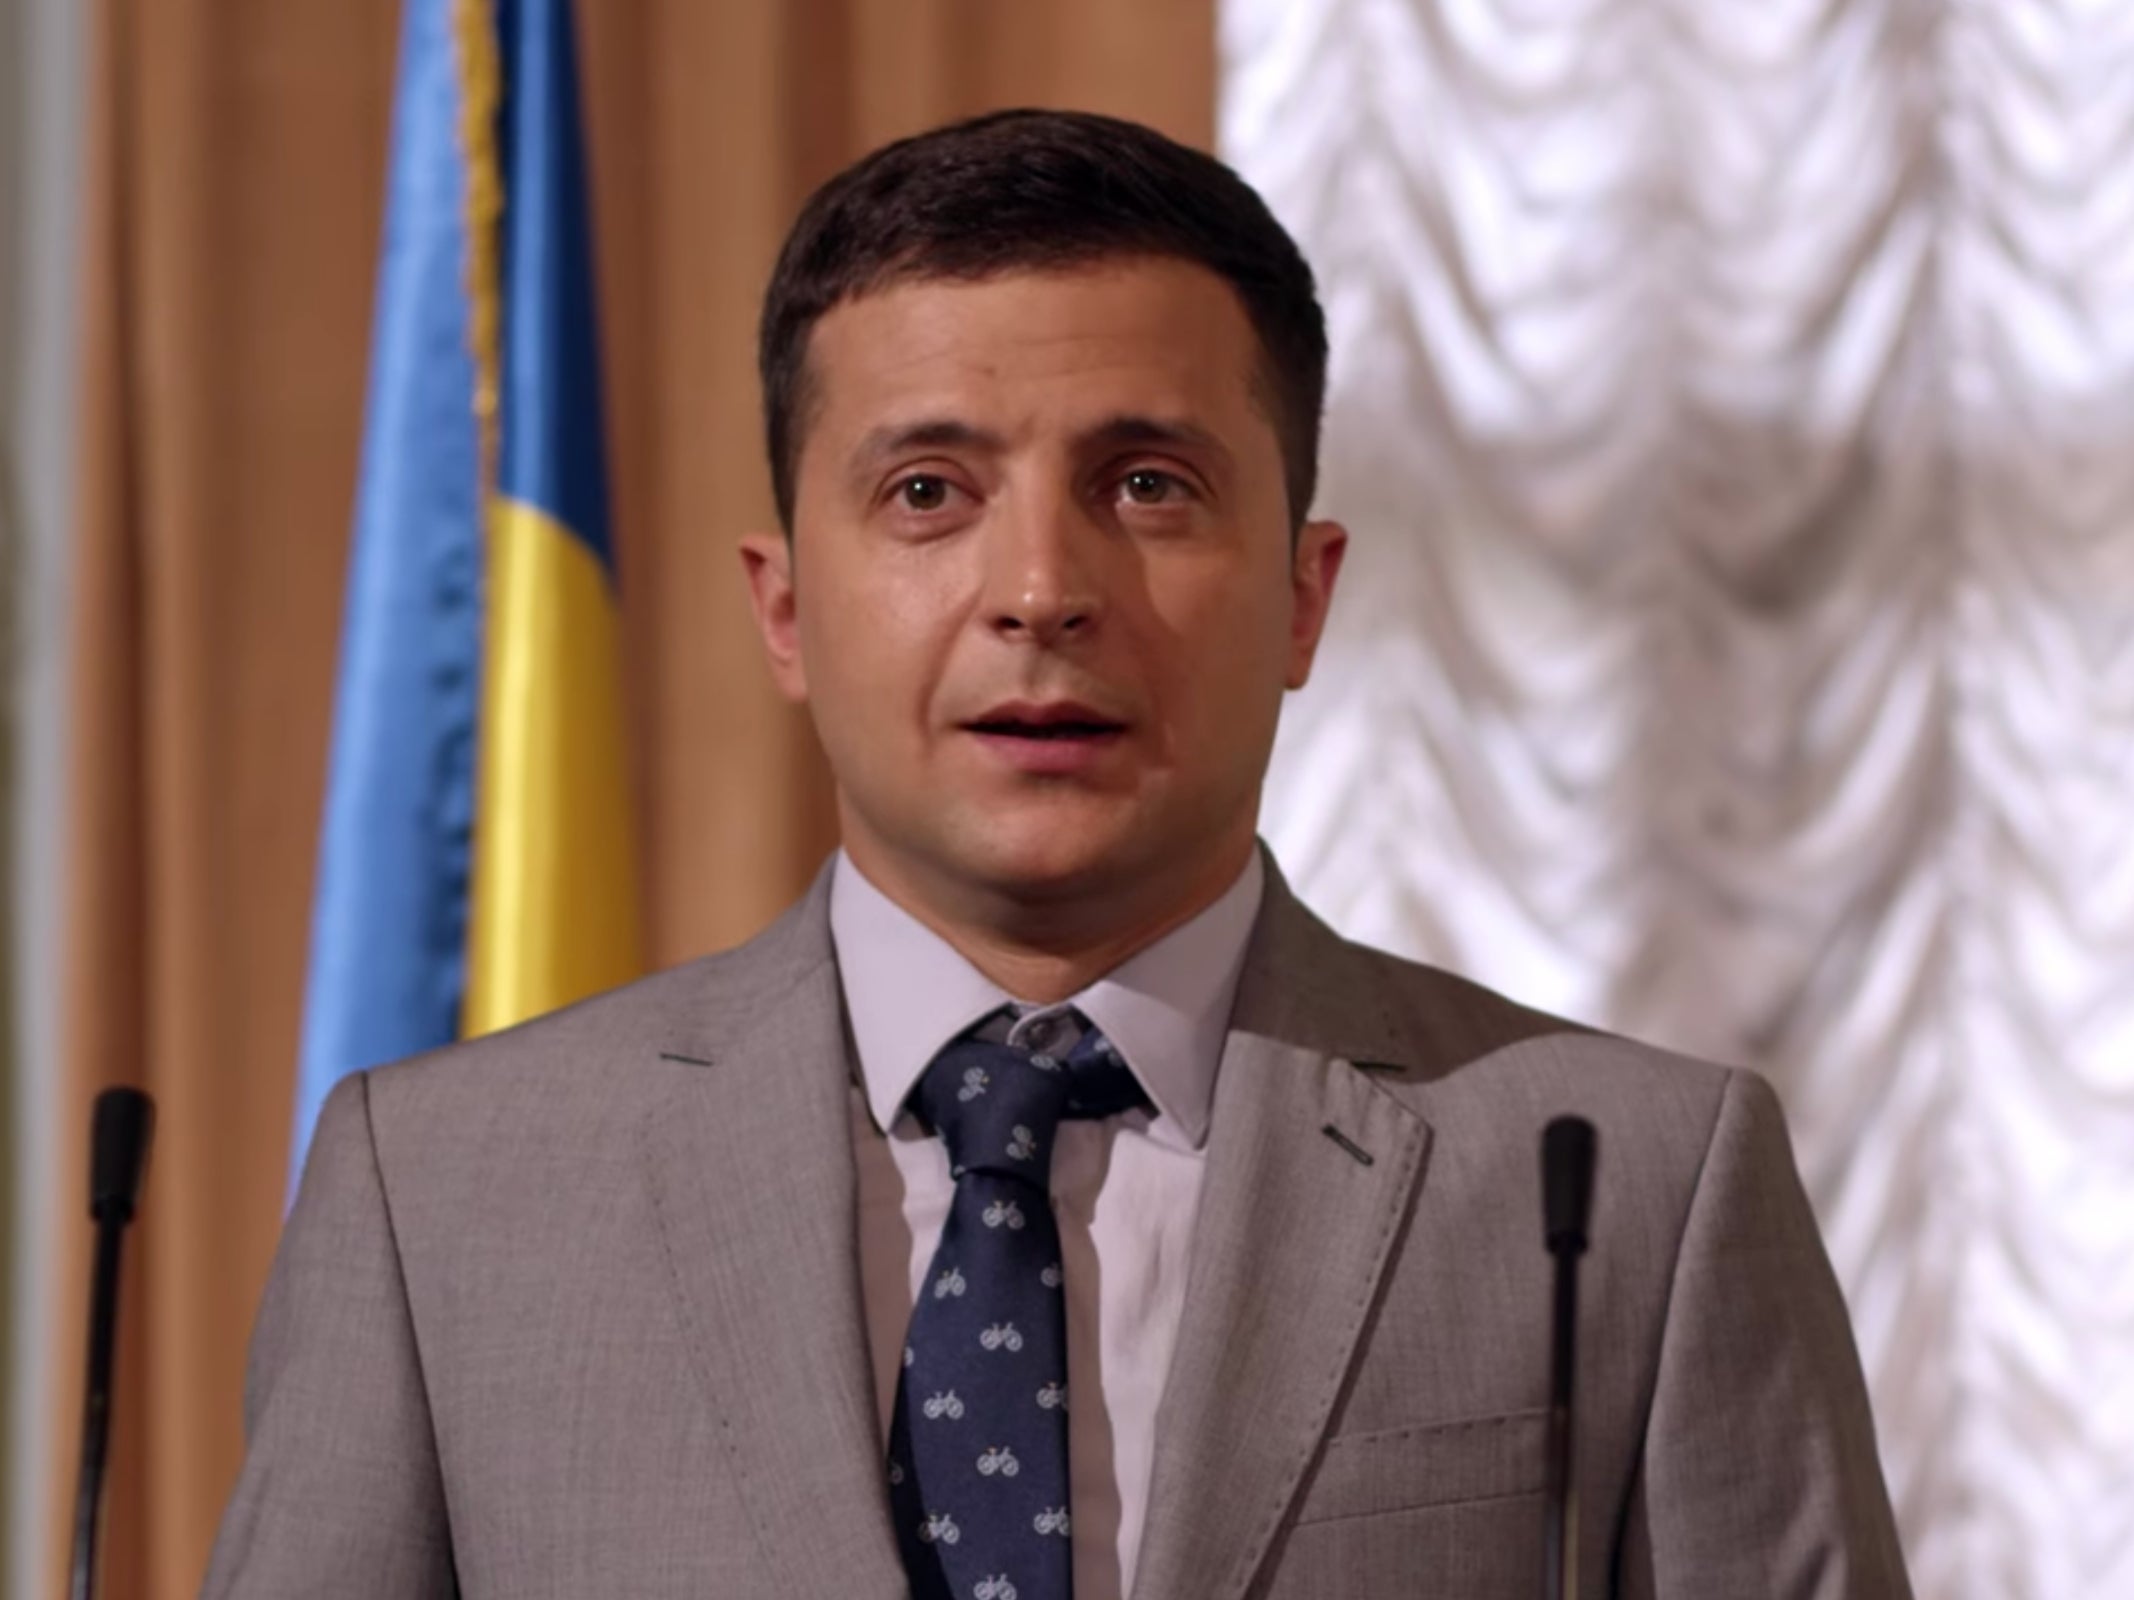 Volodymyr Zelensky in the TV series ‘Servant of the People’